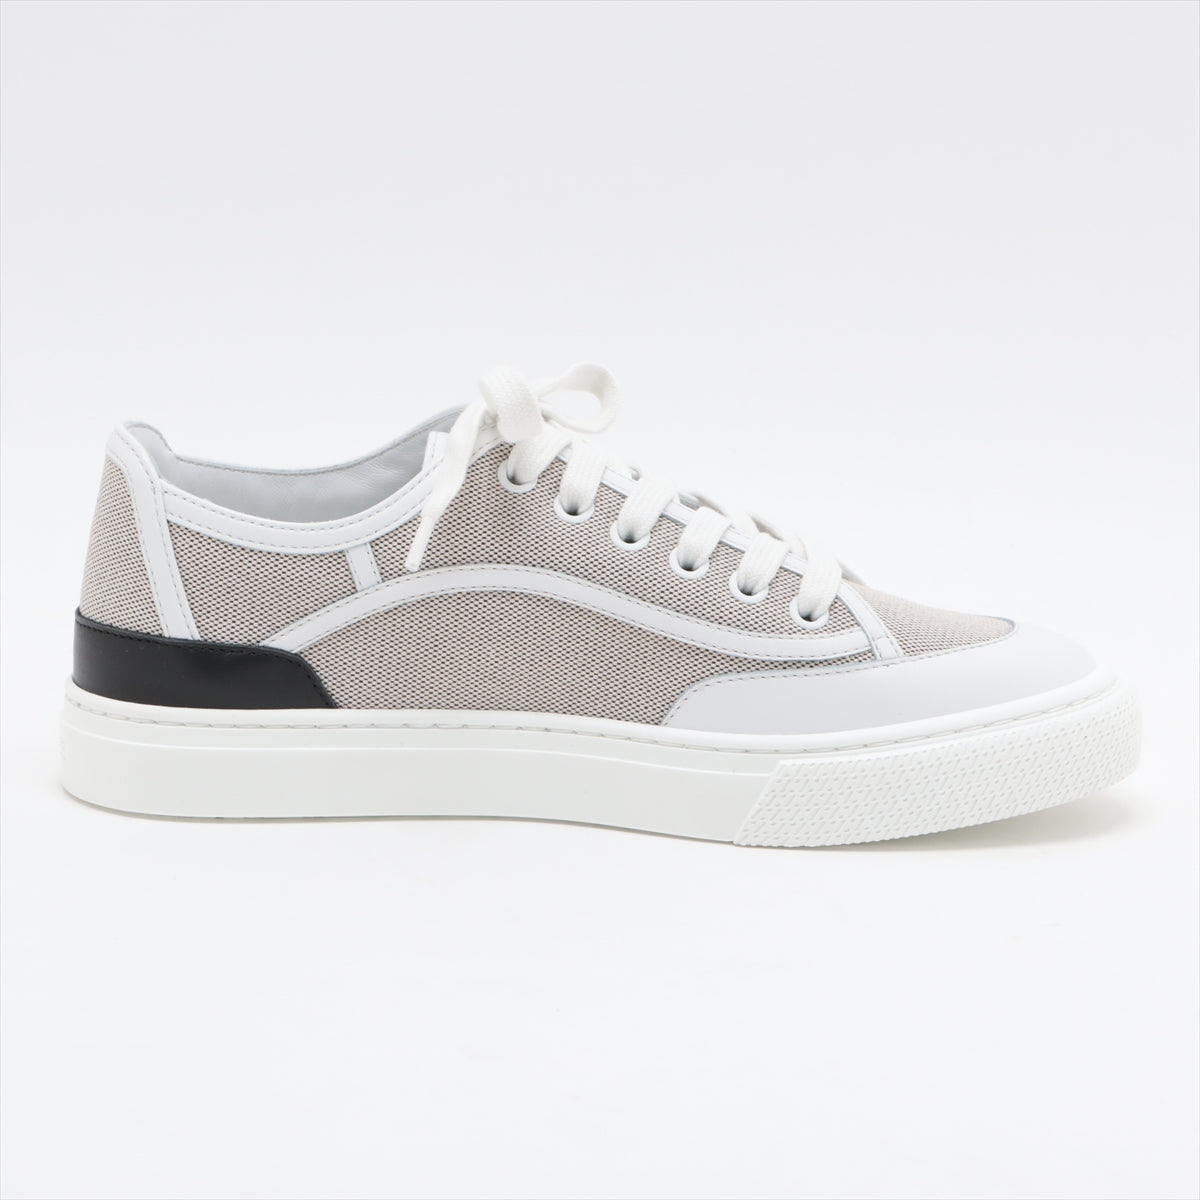 Hermès Canvas & leather Sneakers 36 Ladies' Beige x white box sack Is there a replacement string